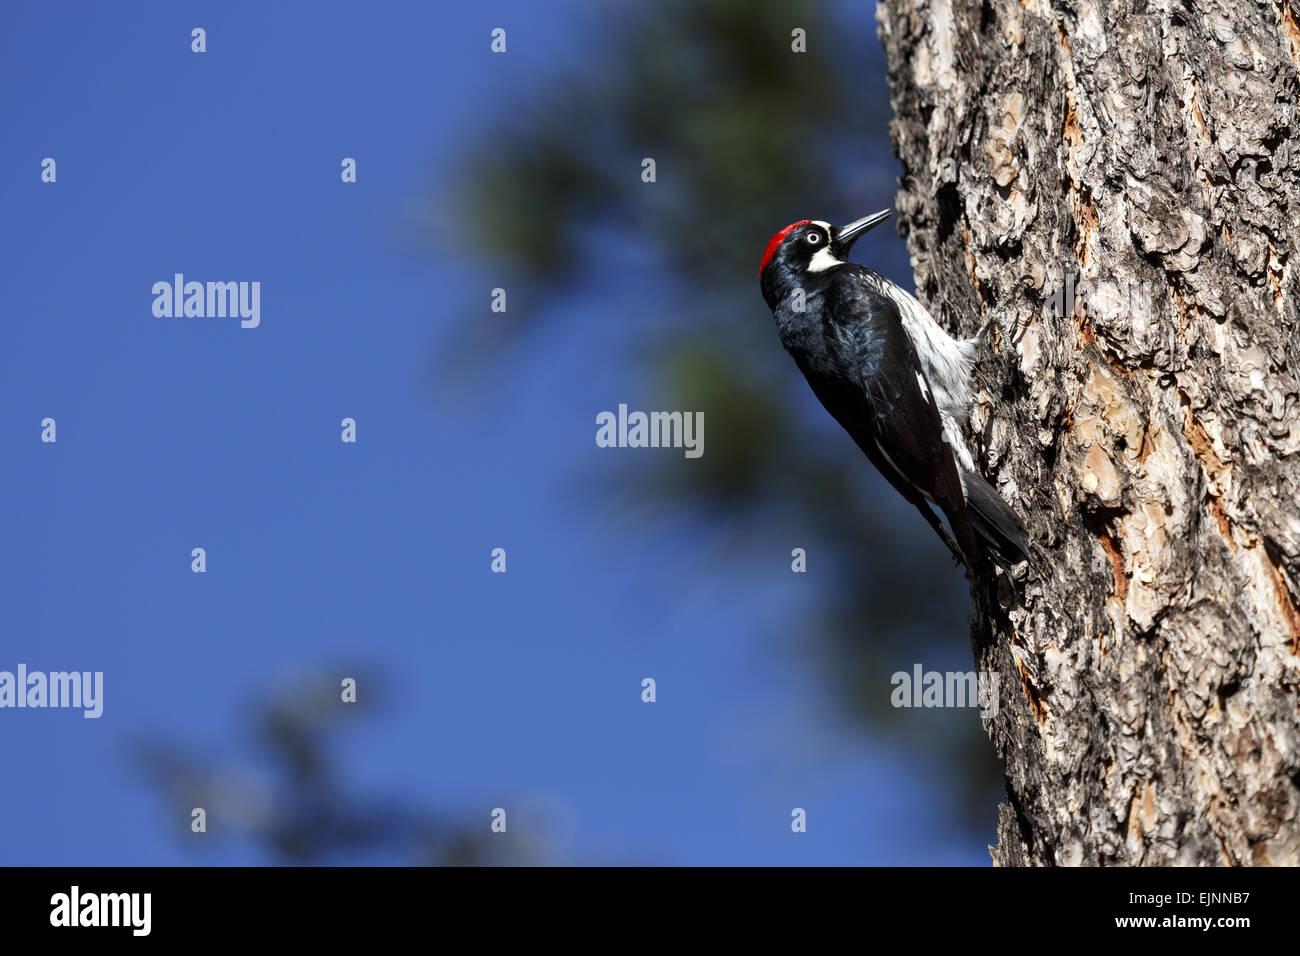 Acorn woodpecker (Melanerpes formicivorus) clinging to tree side view usa Stock Photo